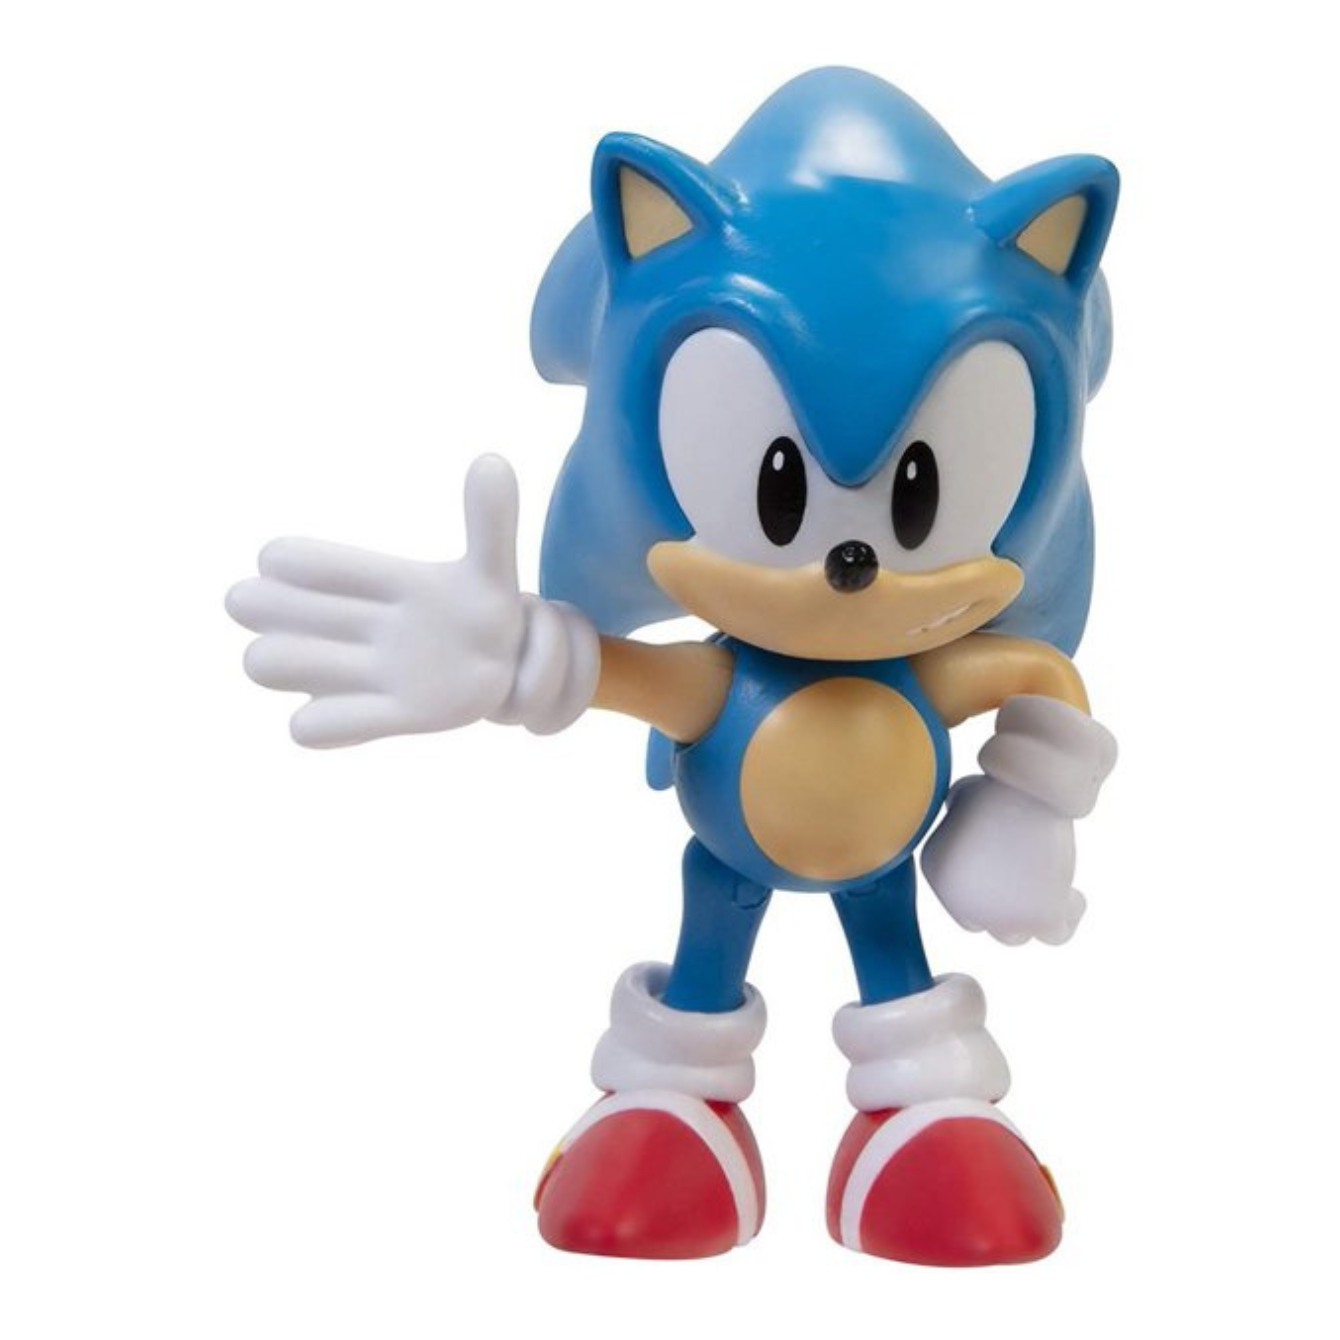 Sonic the Hedgehog Articulated Action Figure 2.5 inch Wave 3